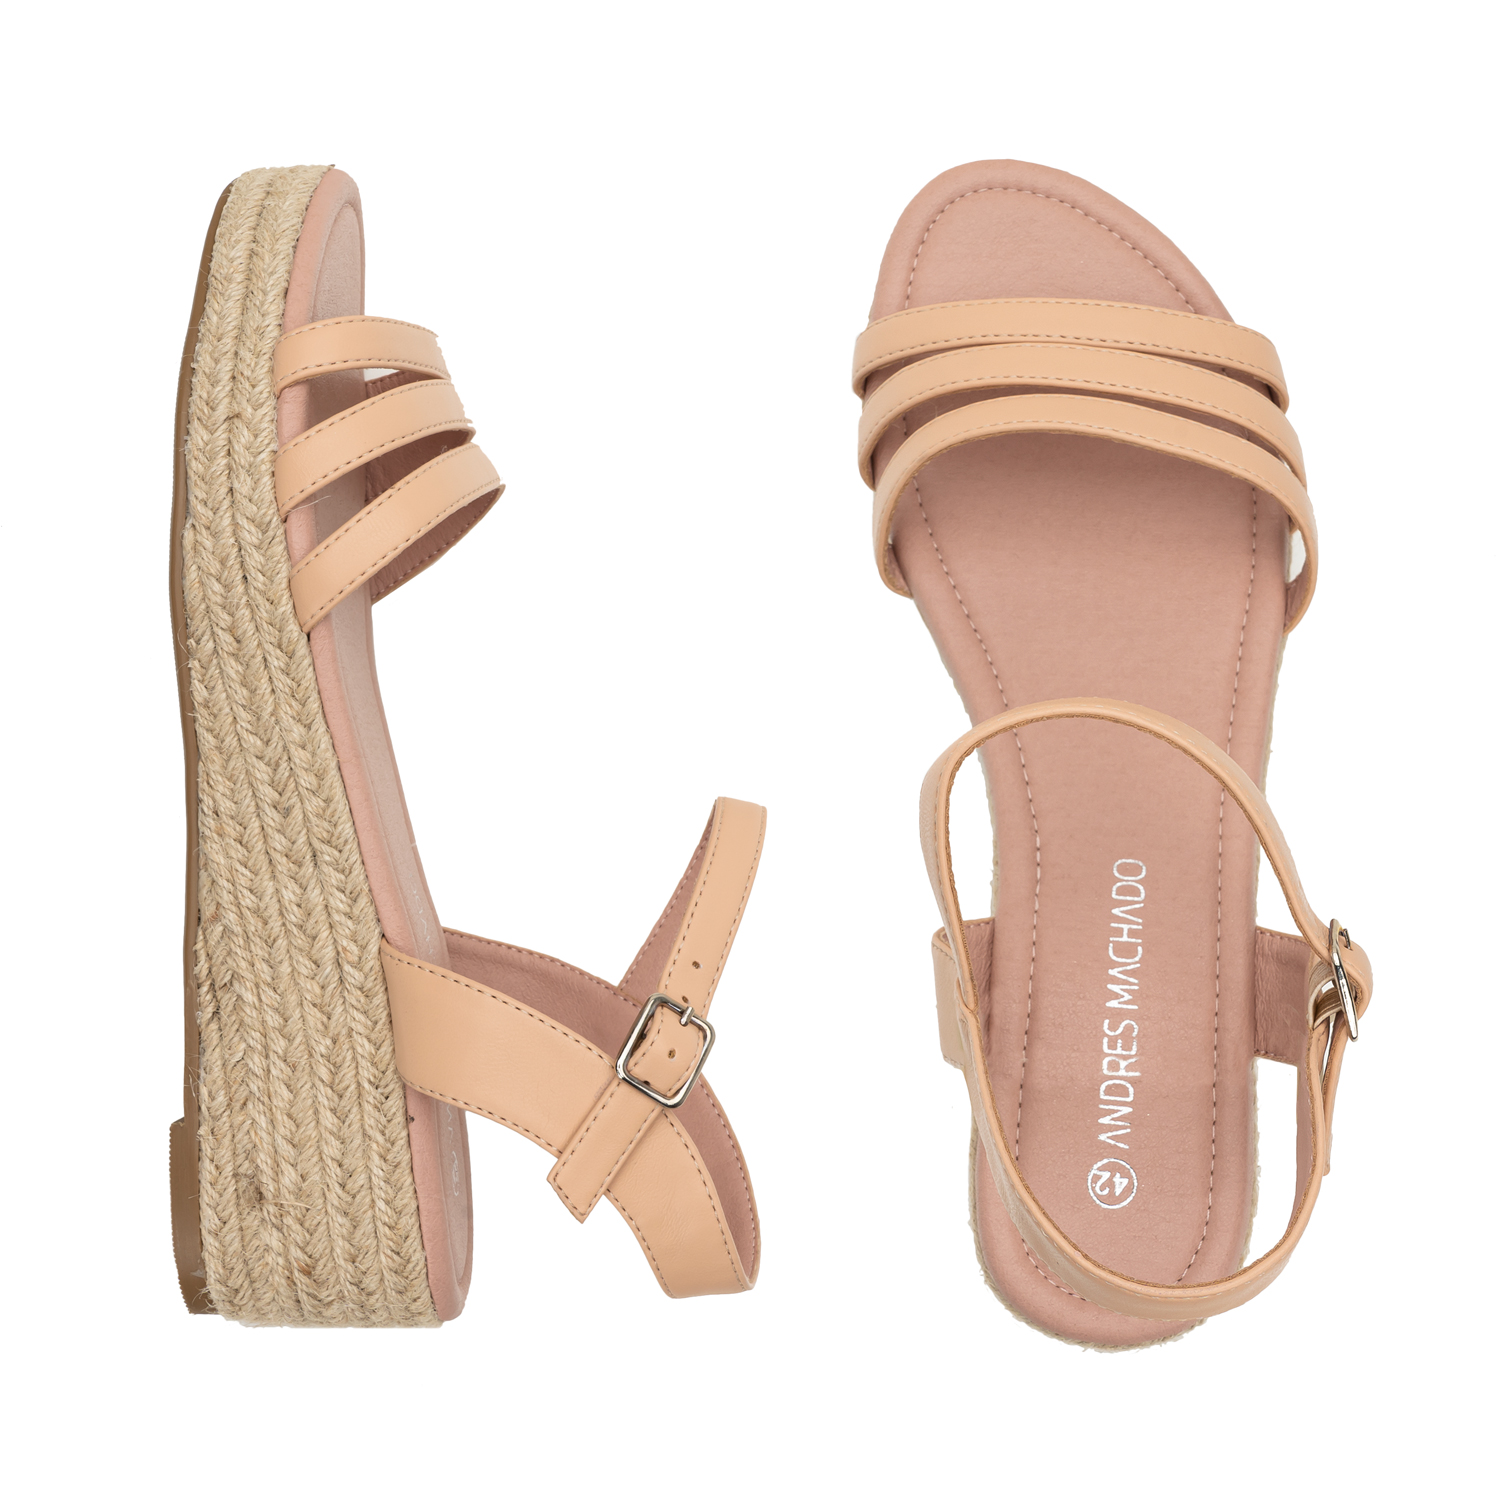 Nude Faux Leather Sandals with Jute Wedge 